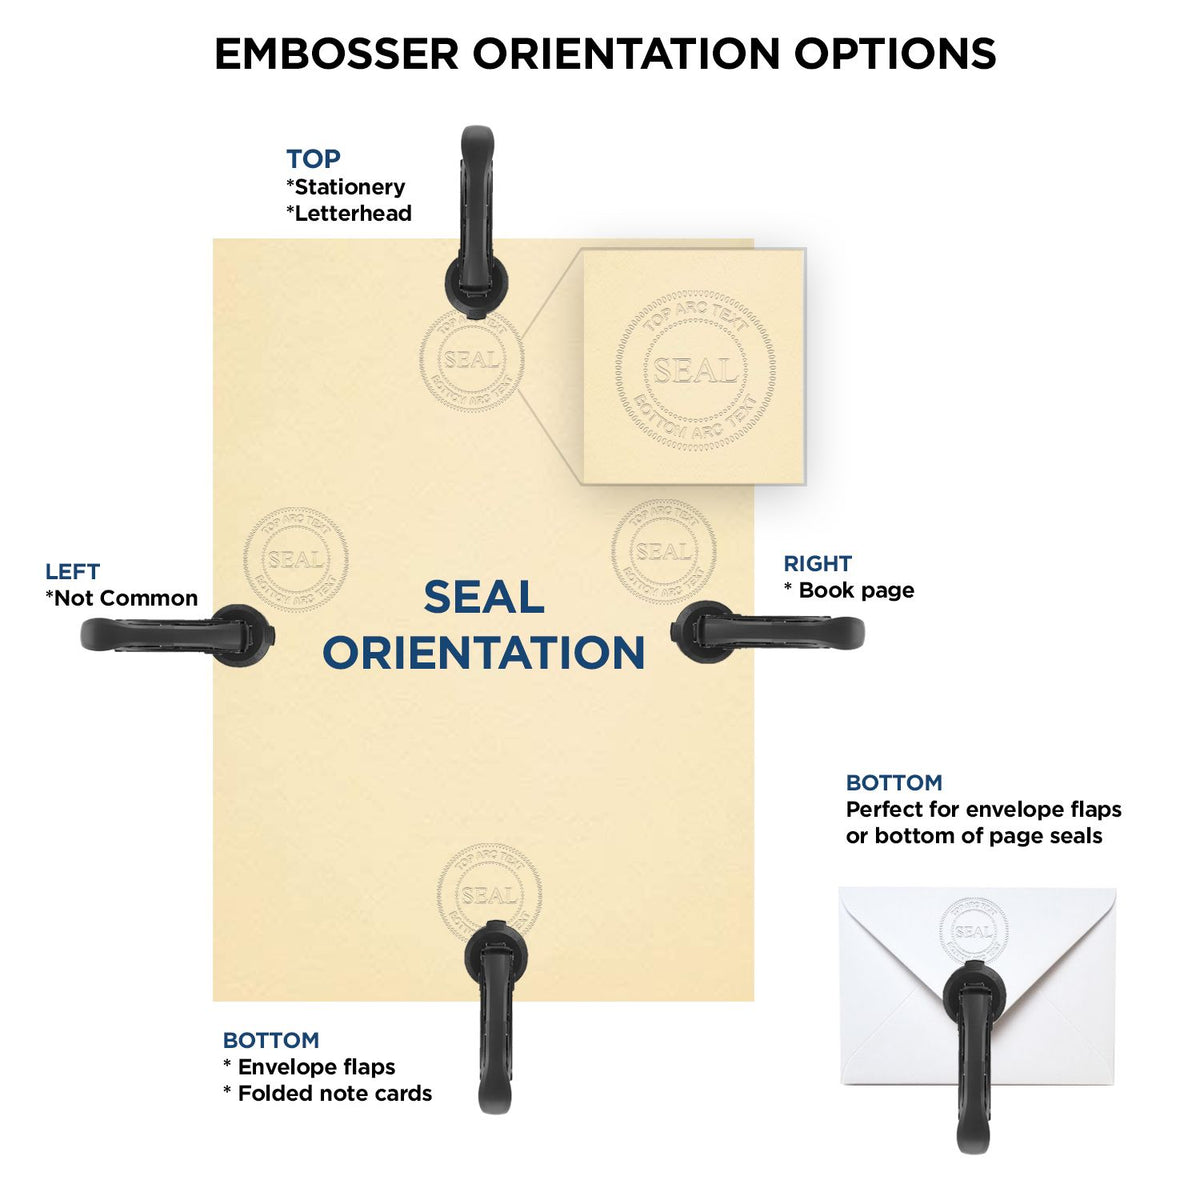 An infographic for the Soft Pennsylvania Professional Engineer Seal showing embosser orientation, this is showing examples of a top, bottom, right and left insert.